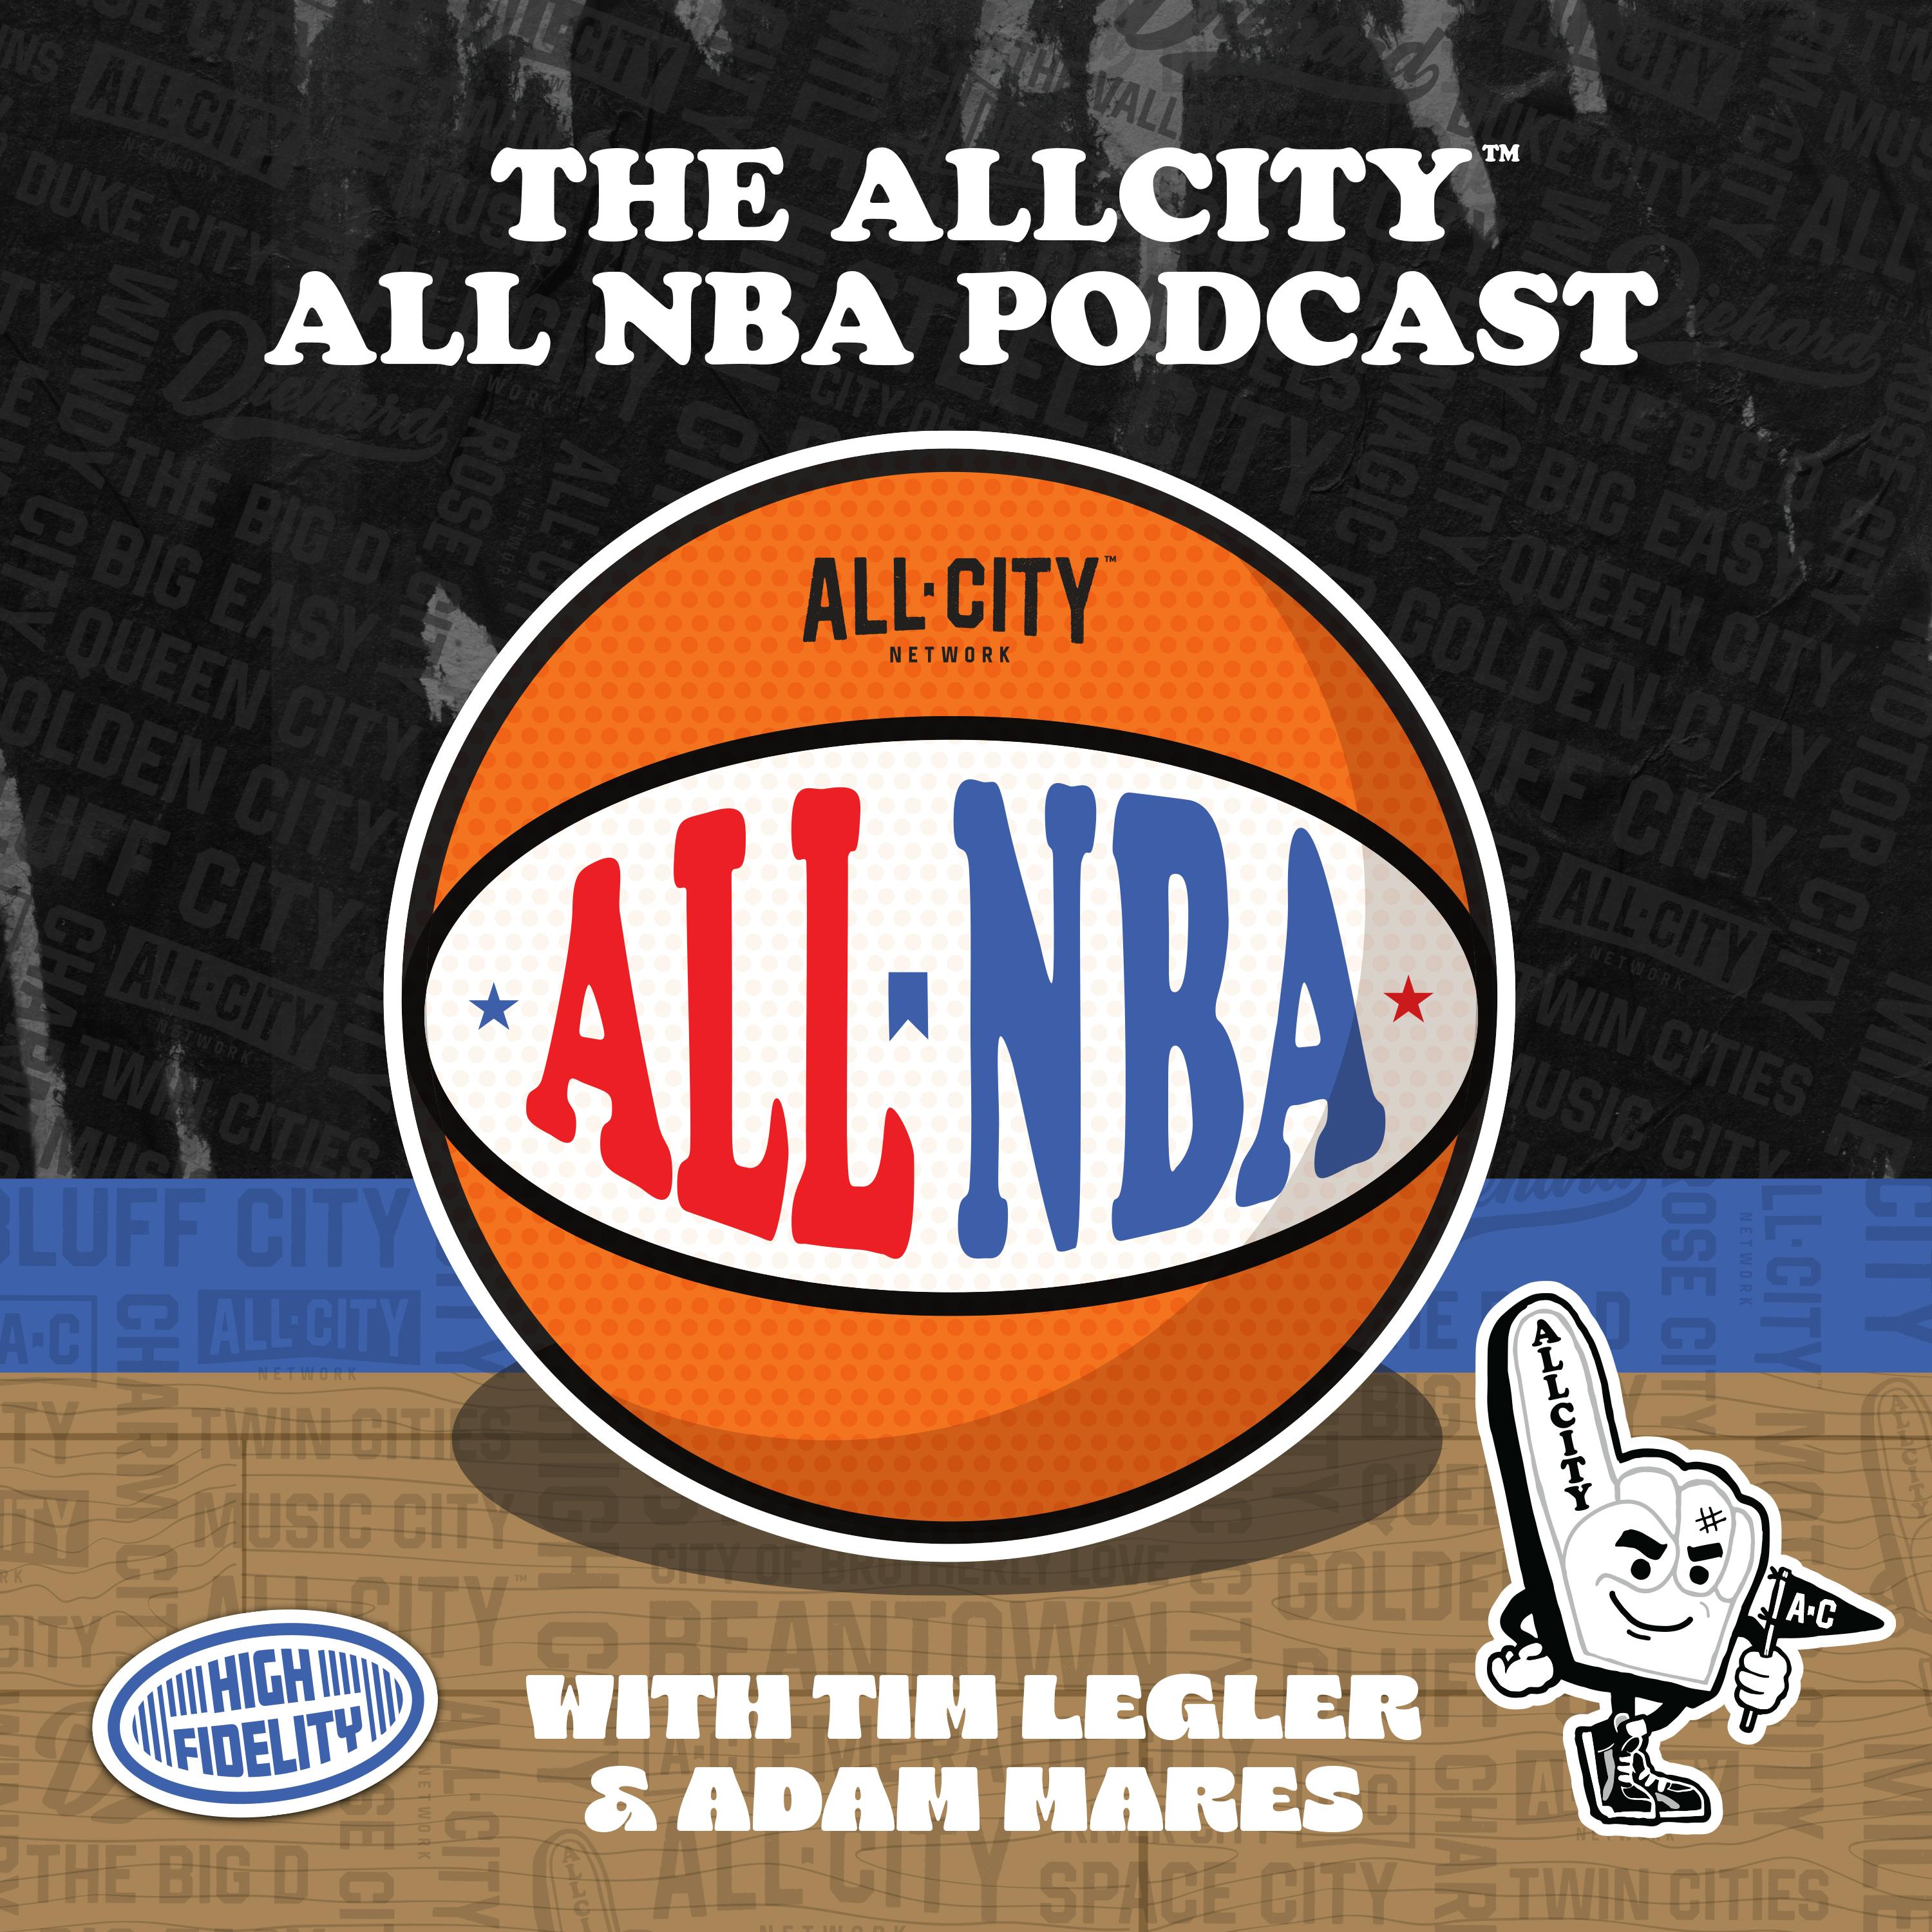 The ALL NBA Podcast: Nuggets and Mavs are on the verge of an epic Western Conference showdown